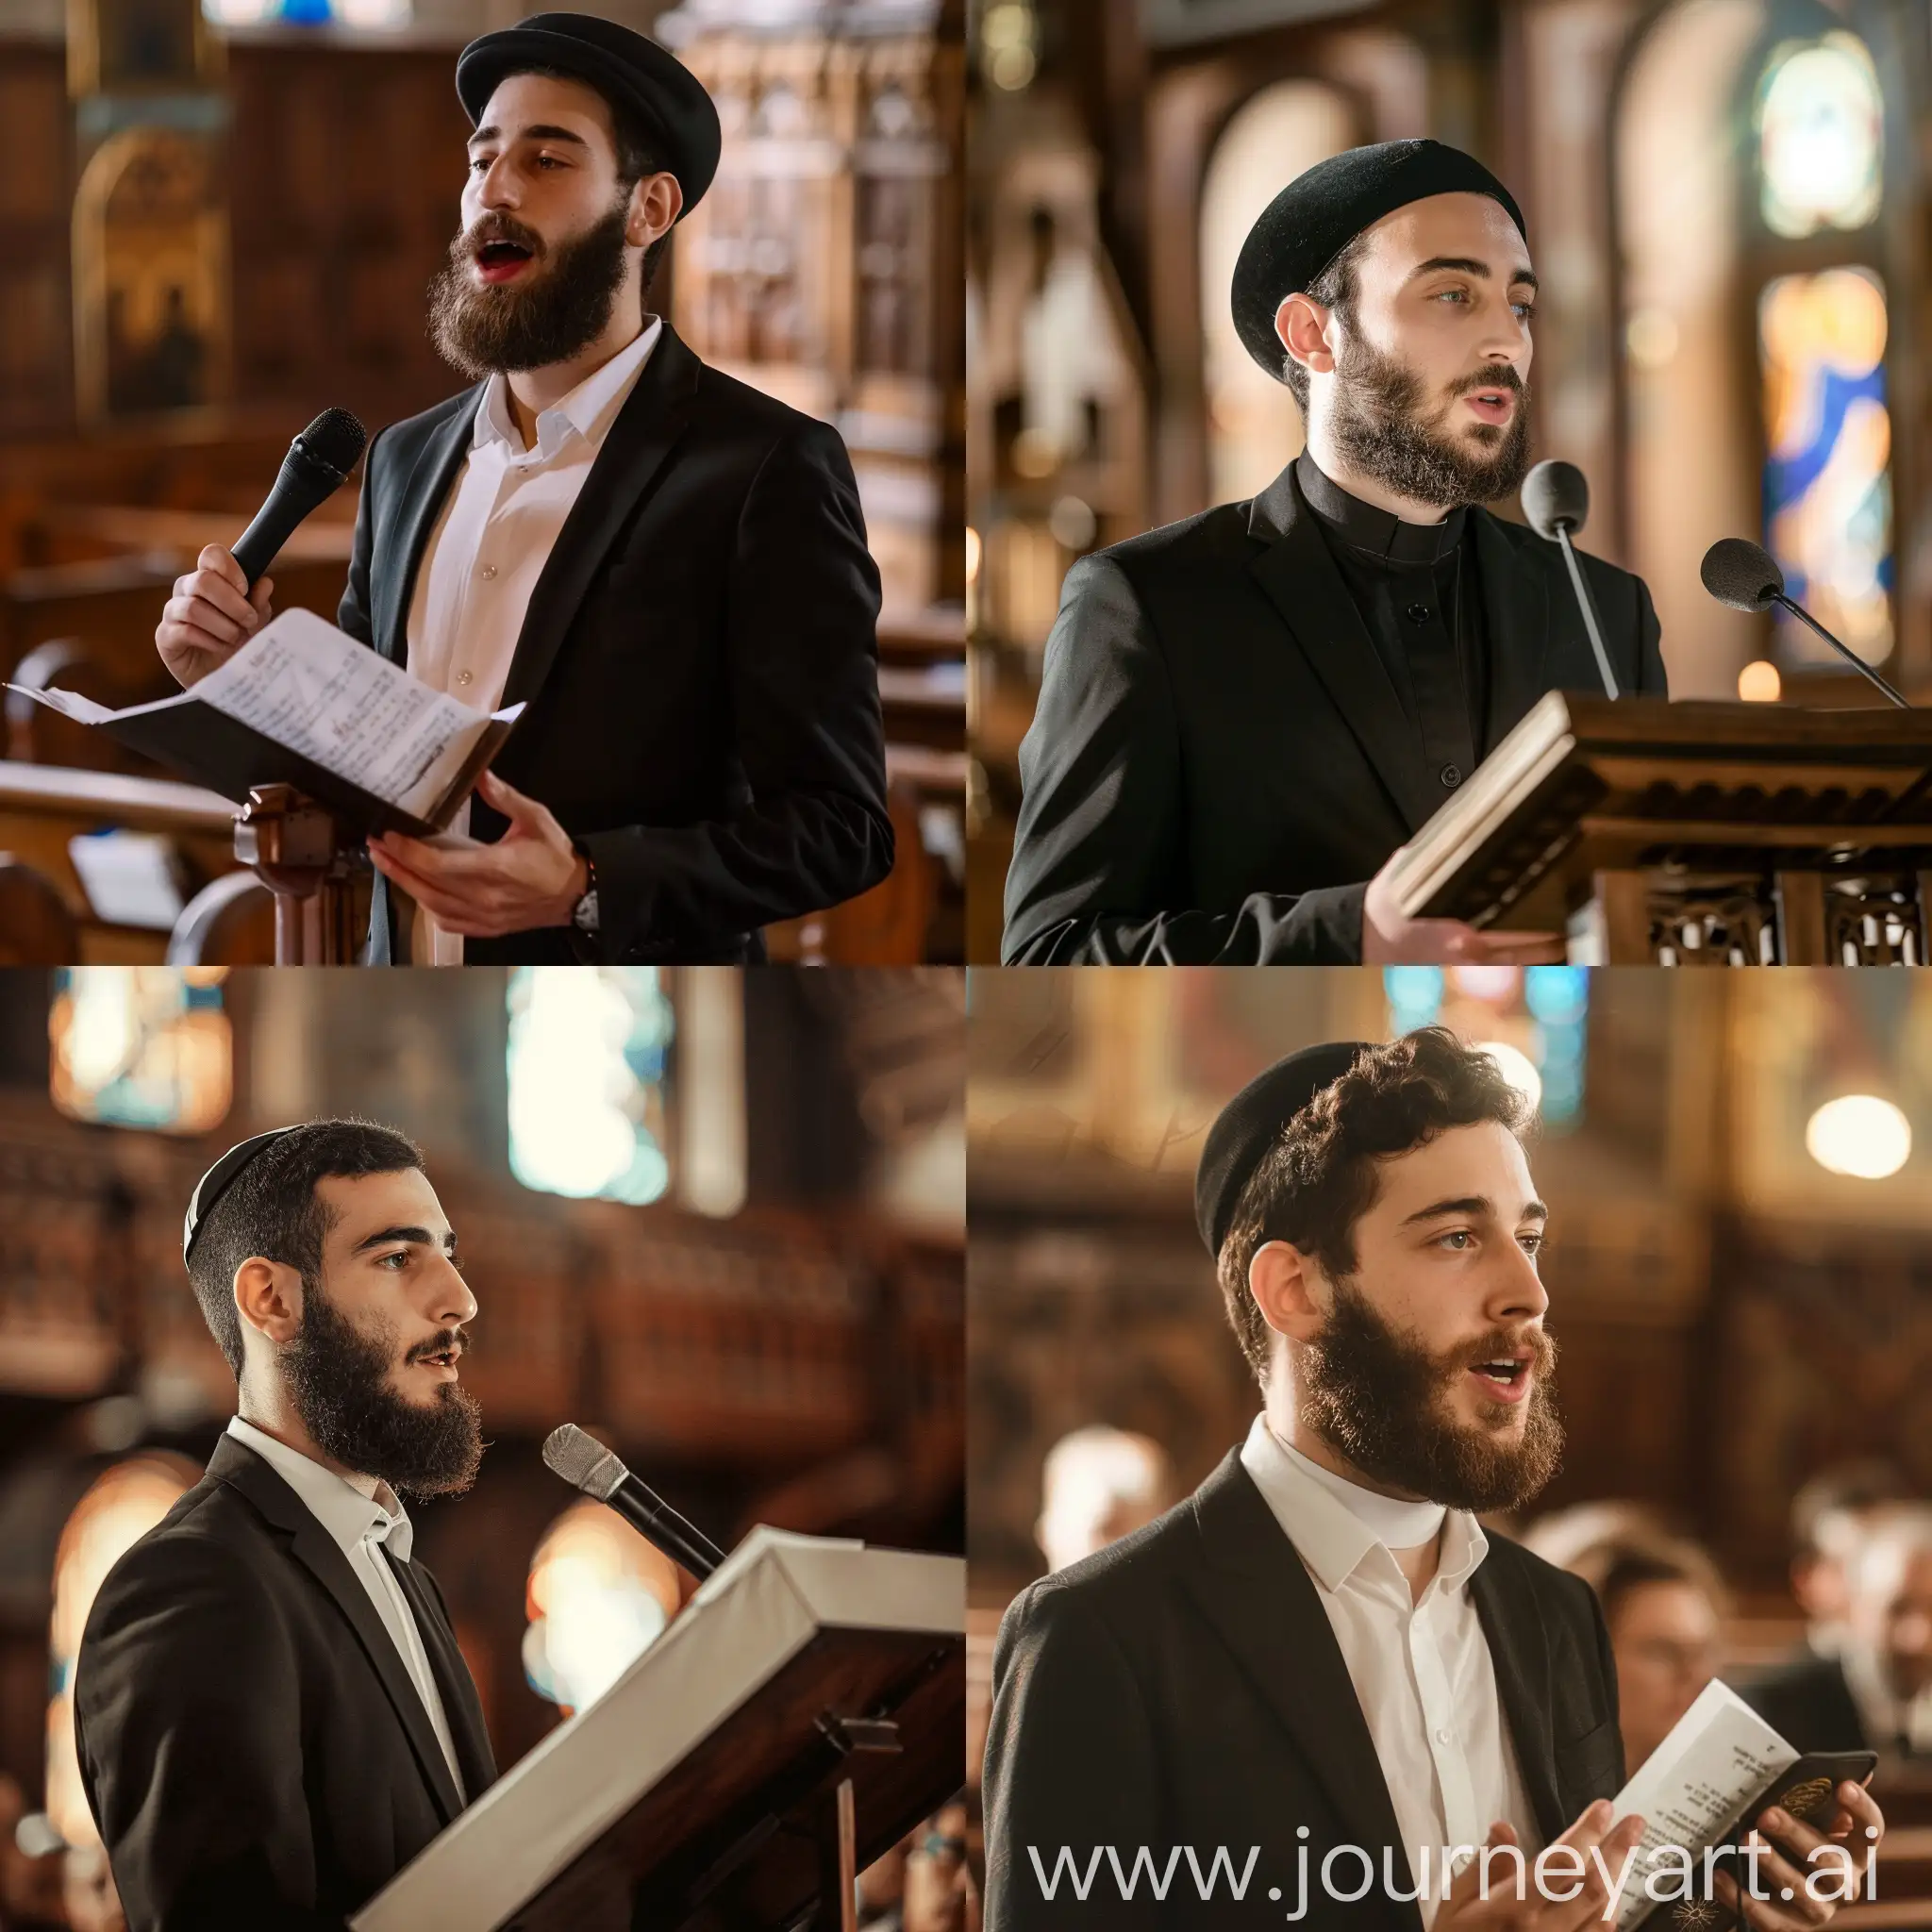 Young-Jewish-Pastor-Speaking-at-Church